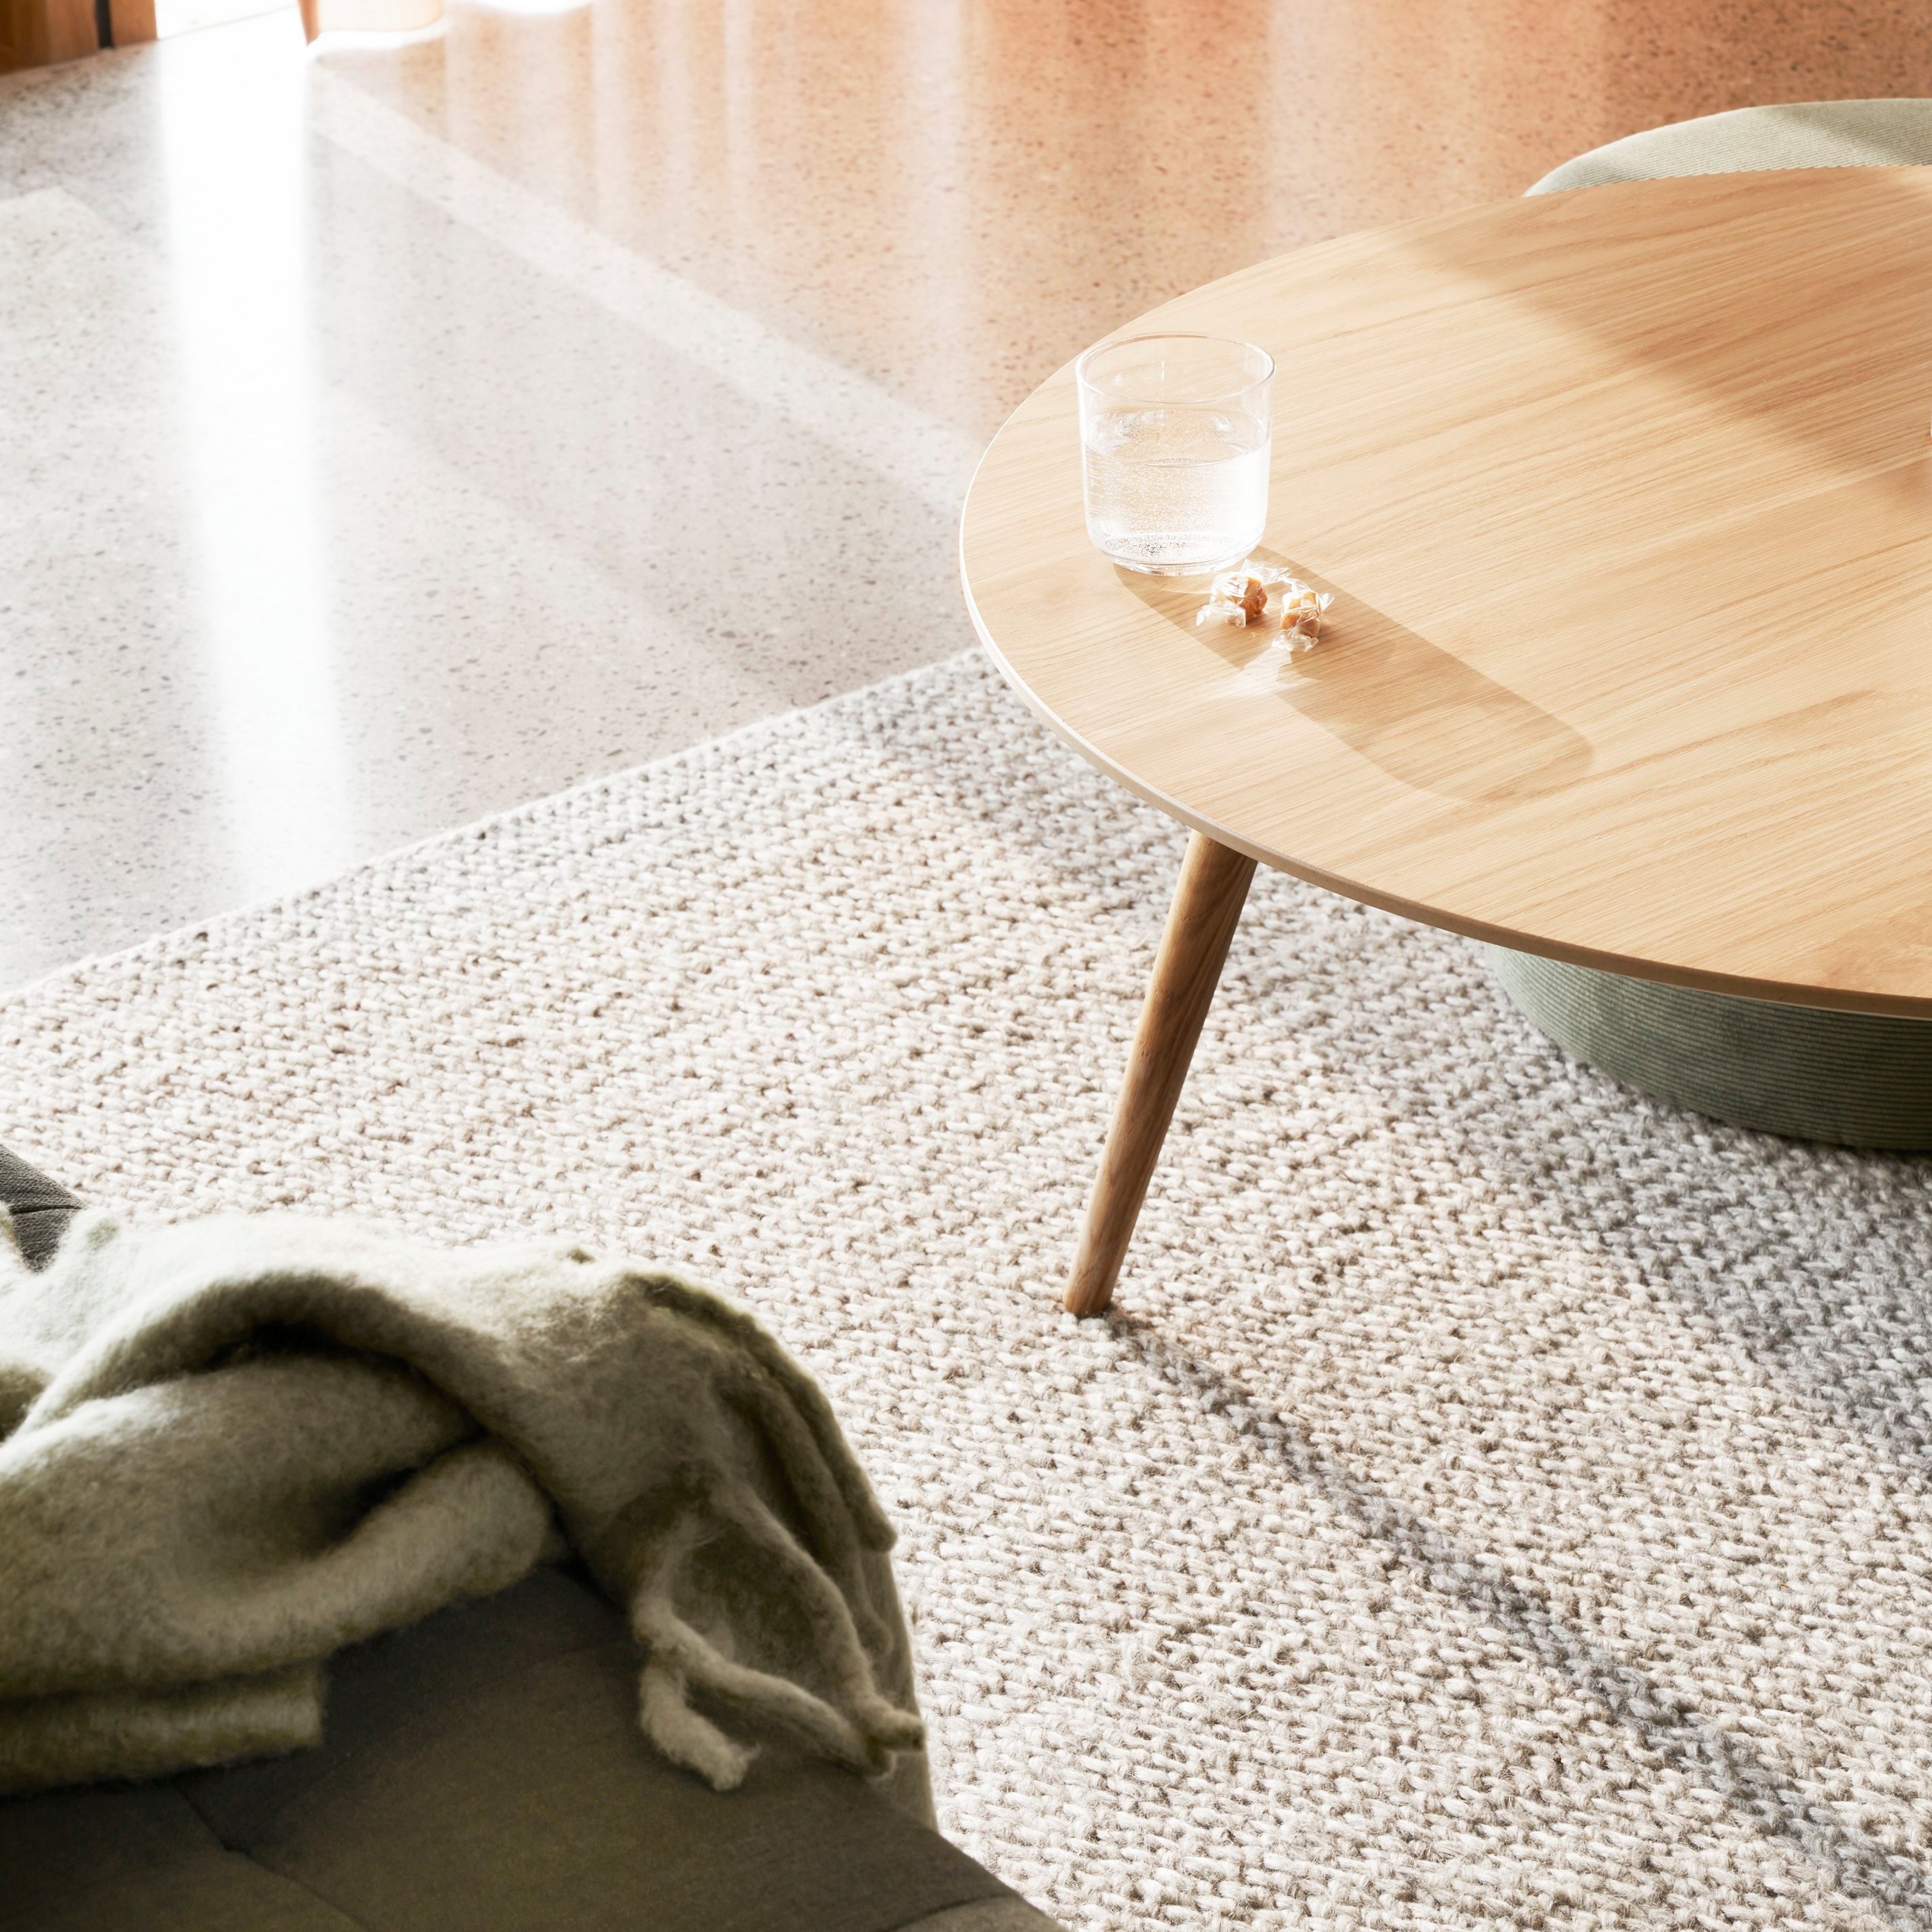 Textured rug with a round wooden table, glass of water, and a soft throw blanket in sunlight.